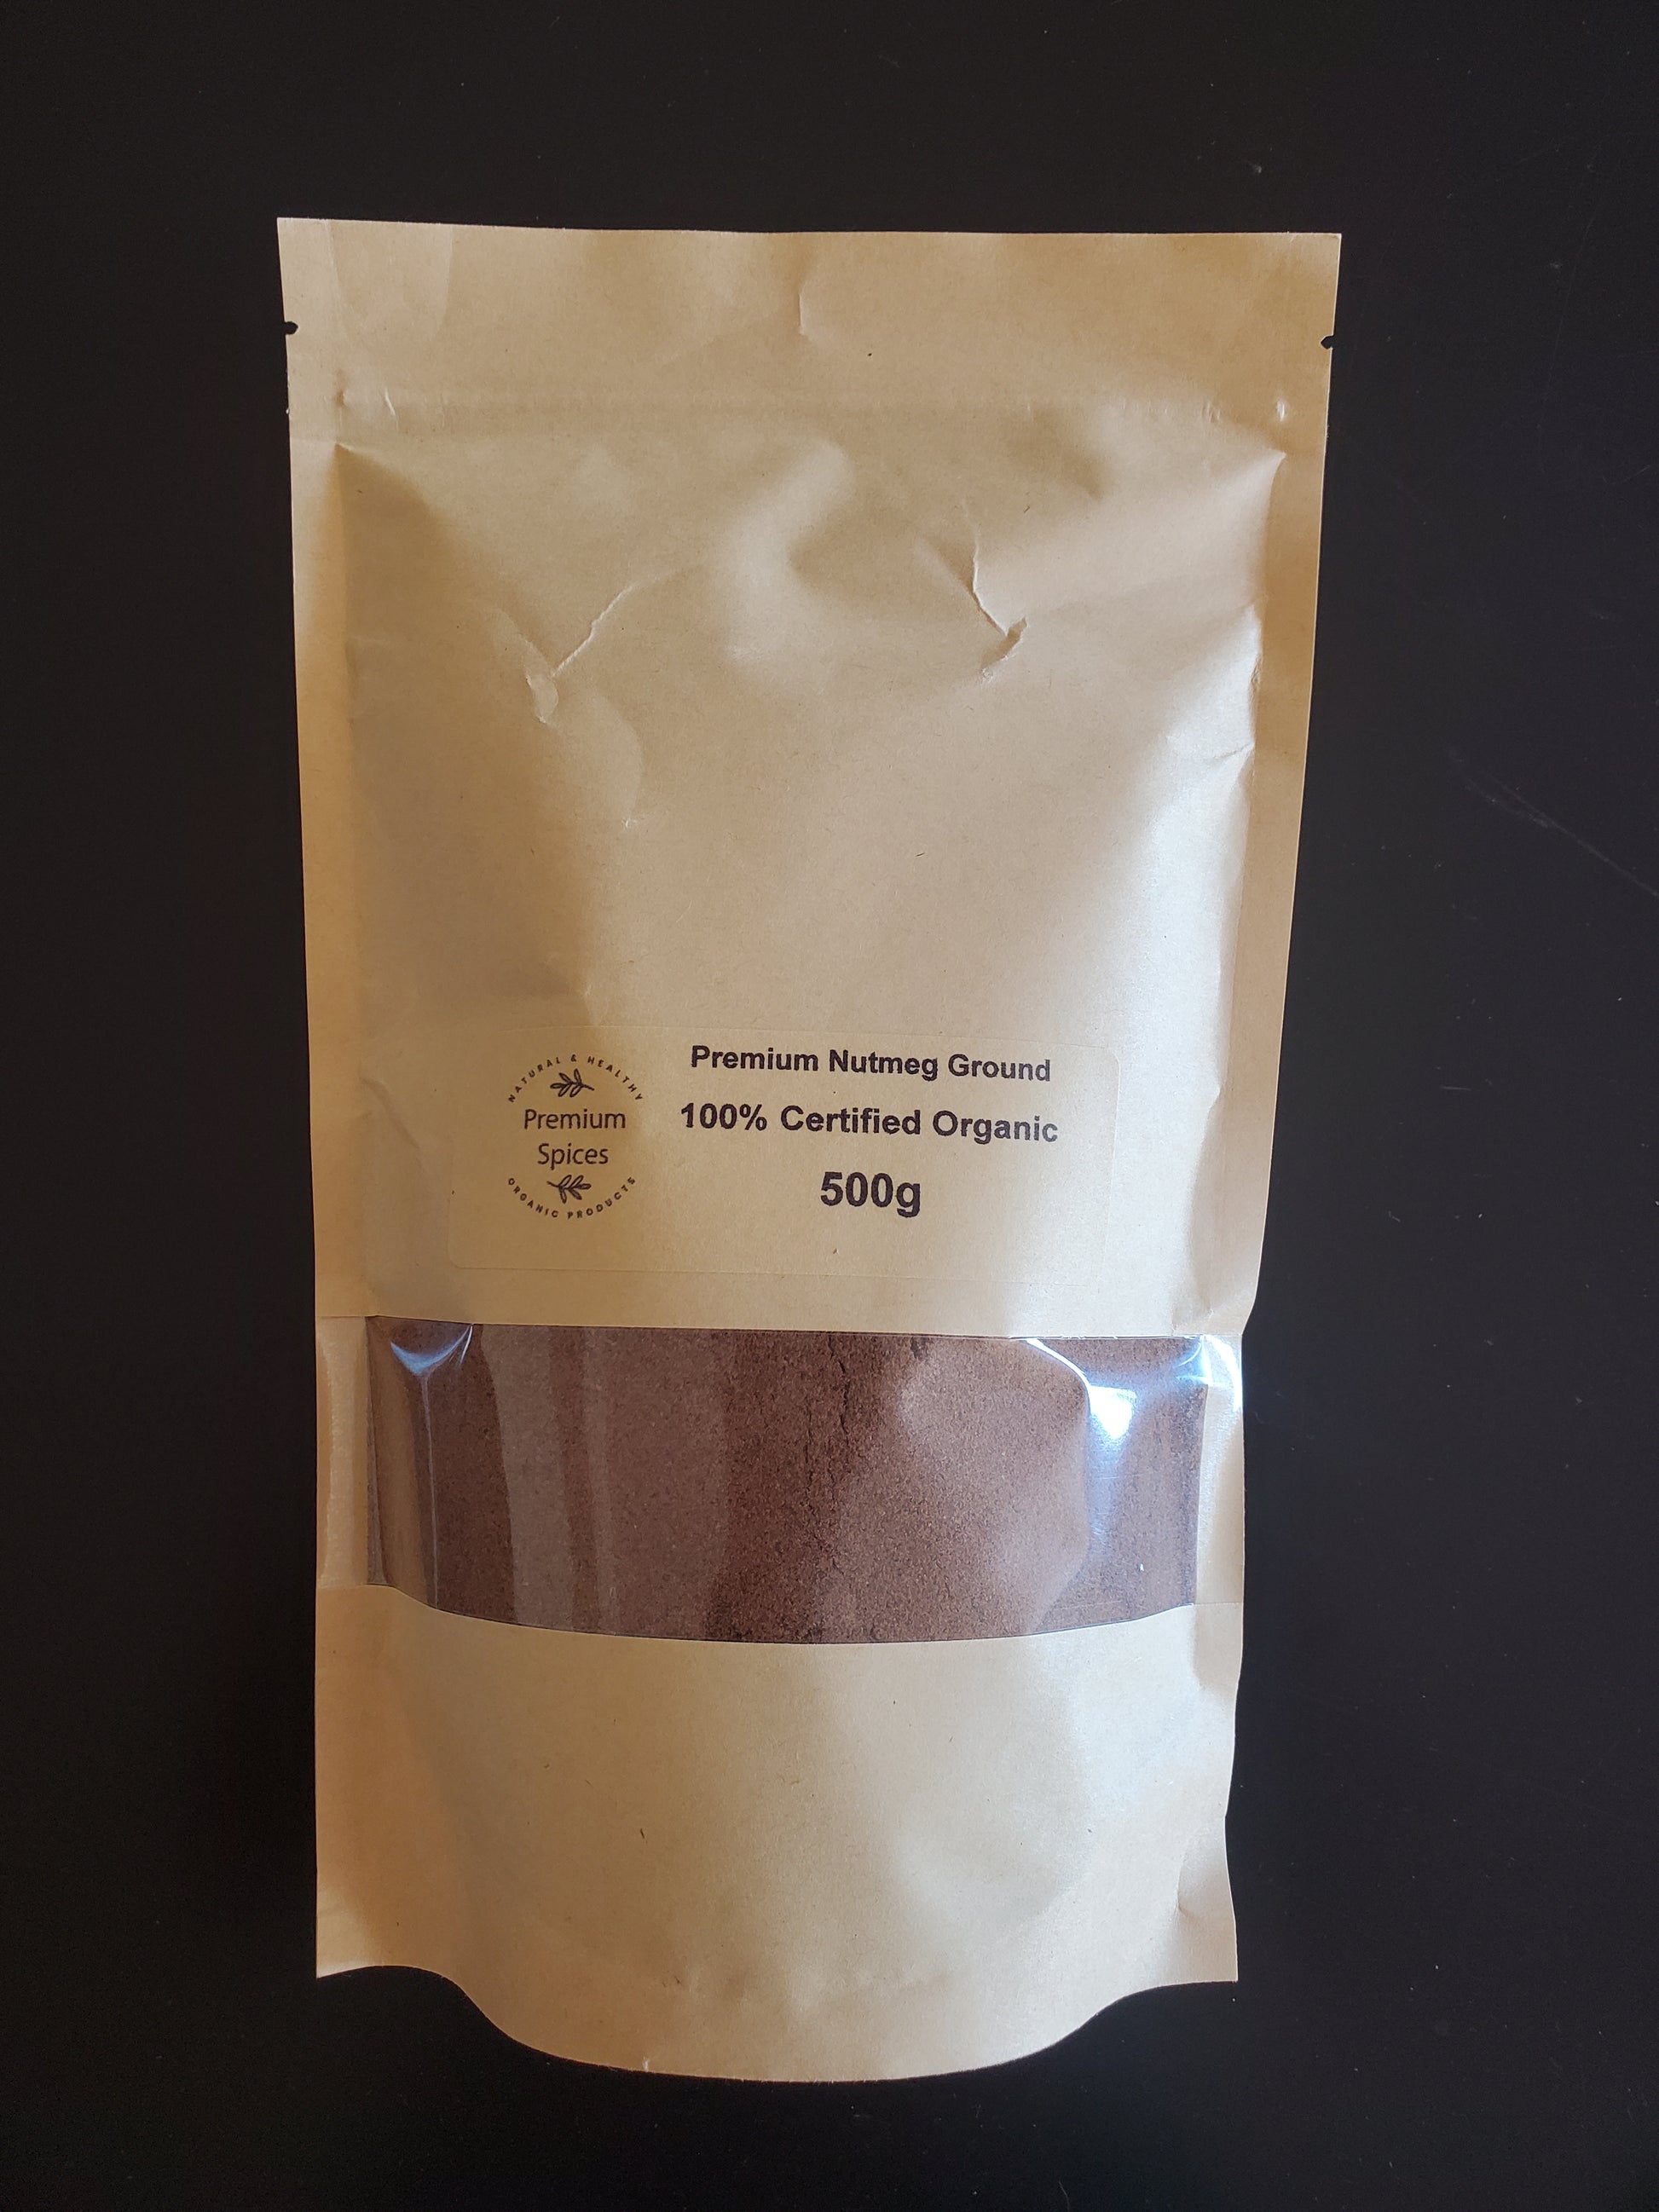 Organic Nutmeg Ground for NZ| Natural Spices showing 500g bag of our premium product